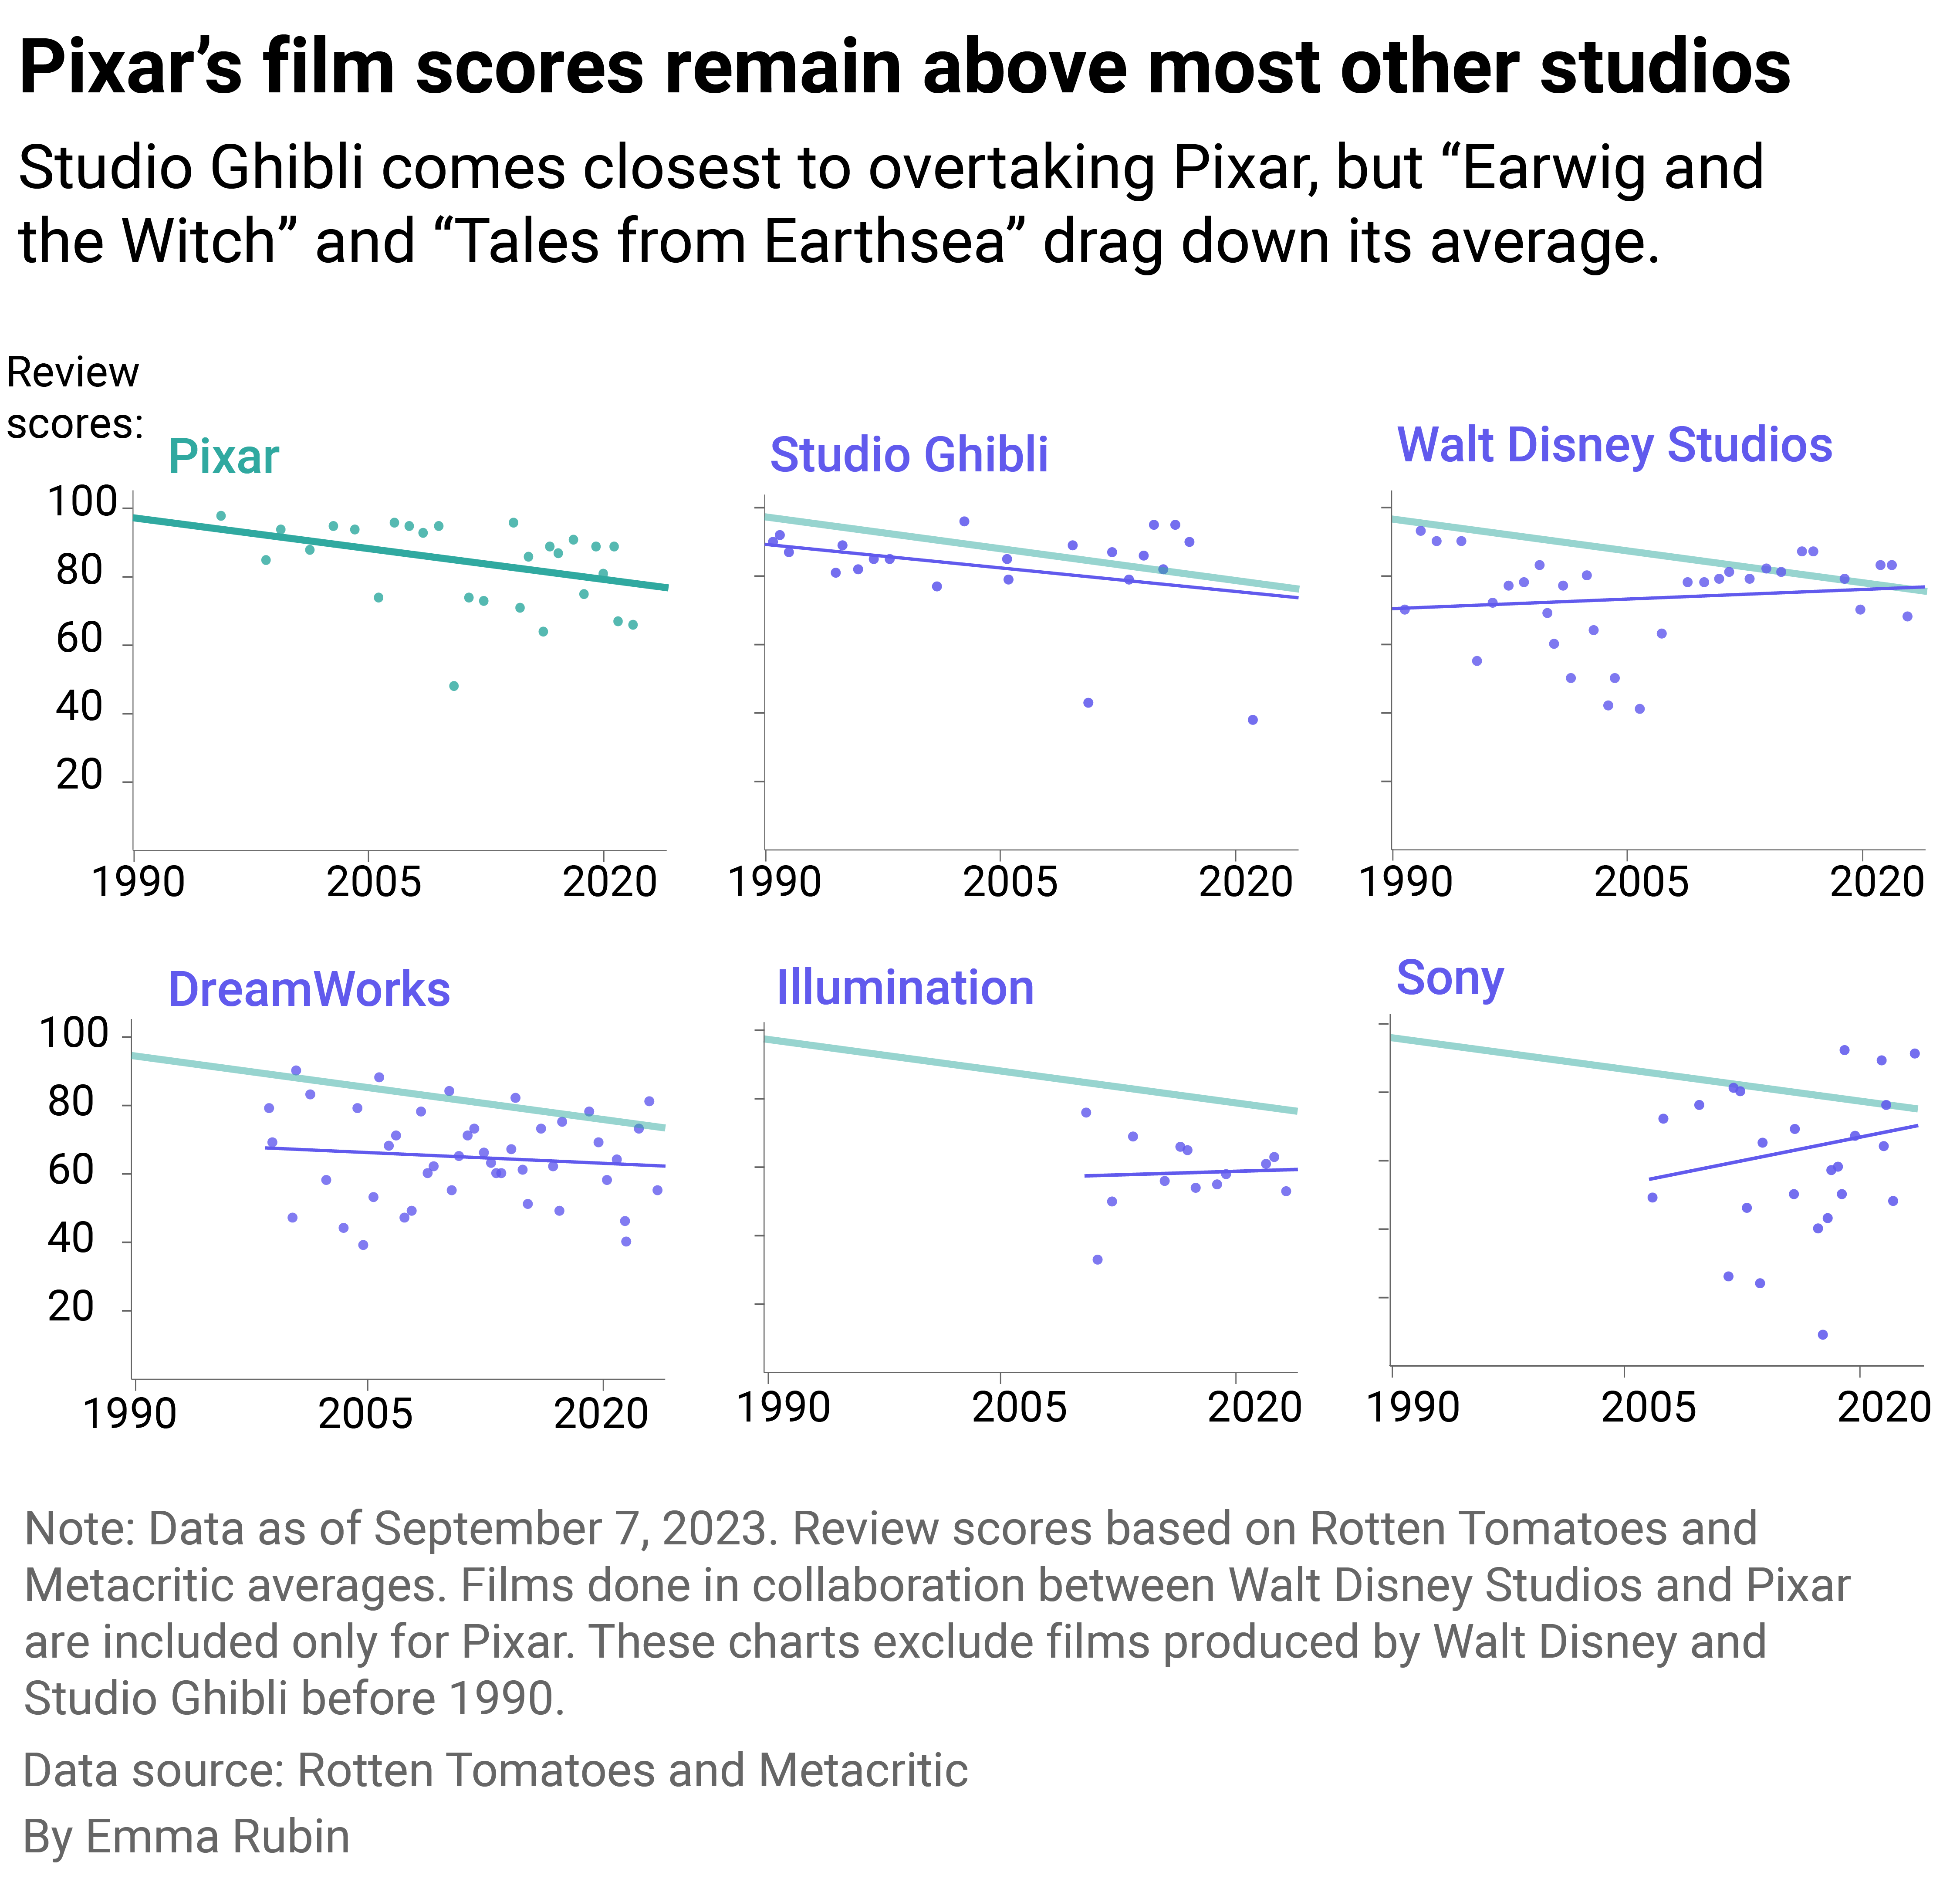 Multiple scatterplots showing Pixar’s film scores remain above most other studios.